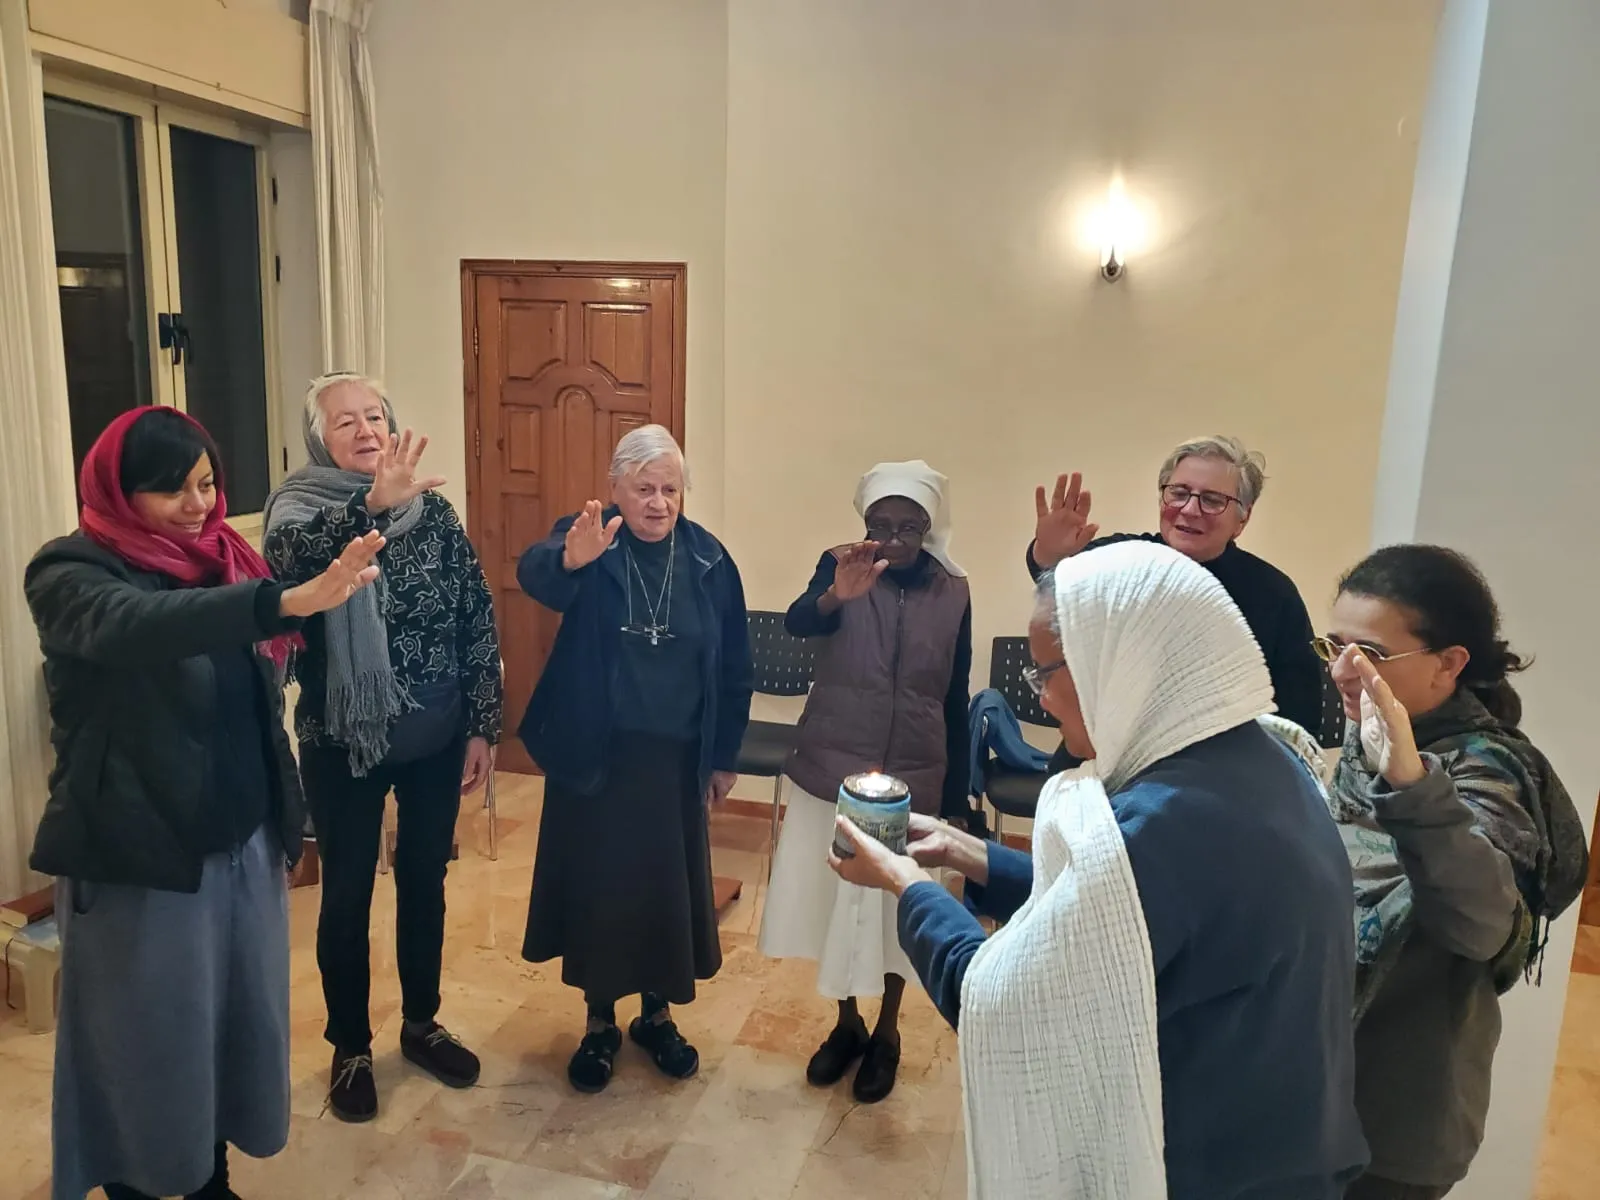 The Comboni Sisters in Jerusalem in a recent photo at the Jordan River. The Comboni Sisters’ community in Jerusalem currently consists of six sisters and each is involved in a specific ministry. Credit: Photo courtesy of Sister Anna Maria Sgaramella